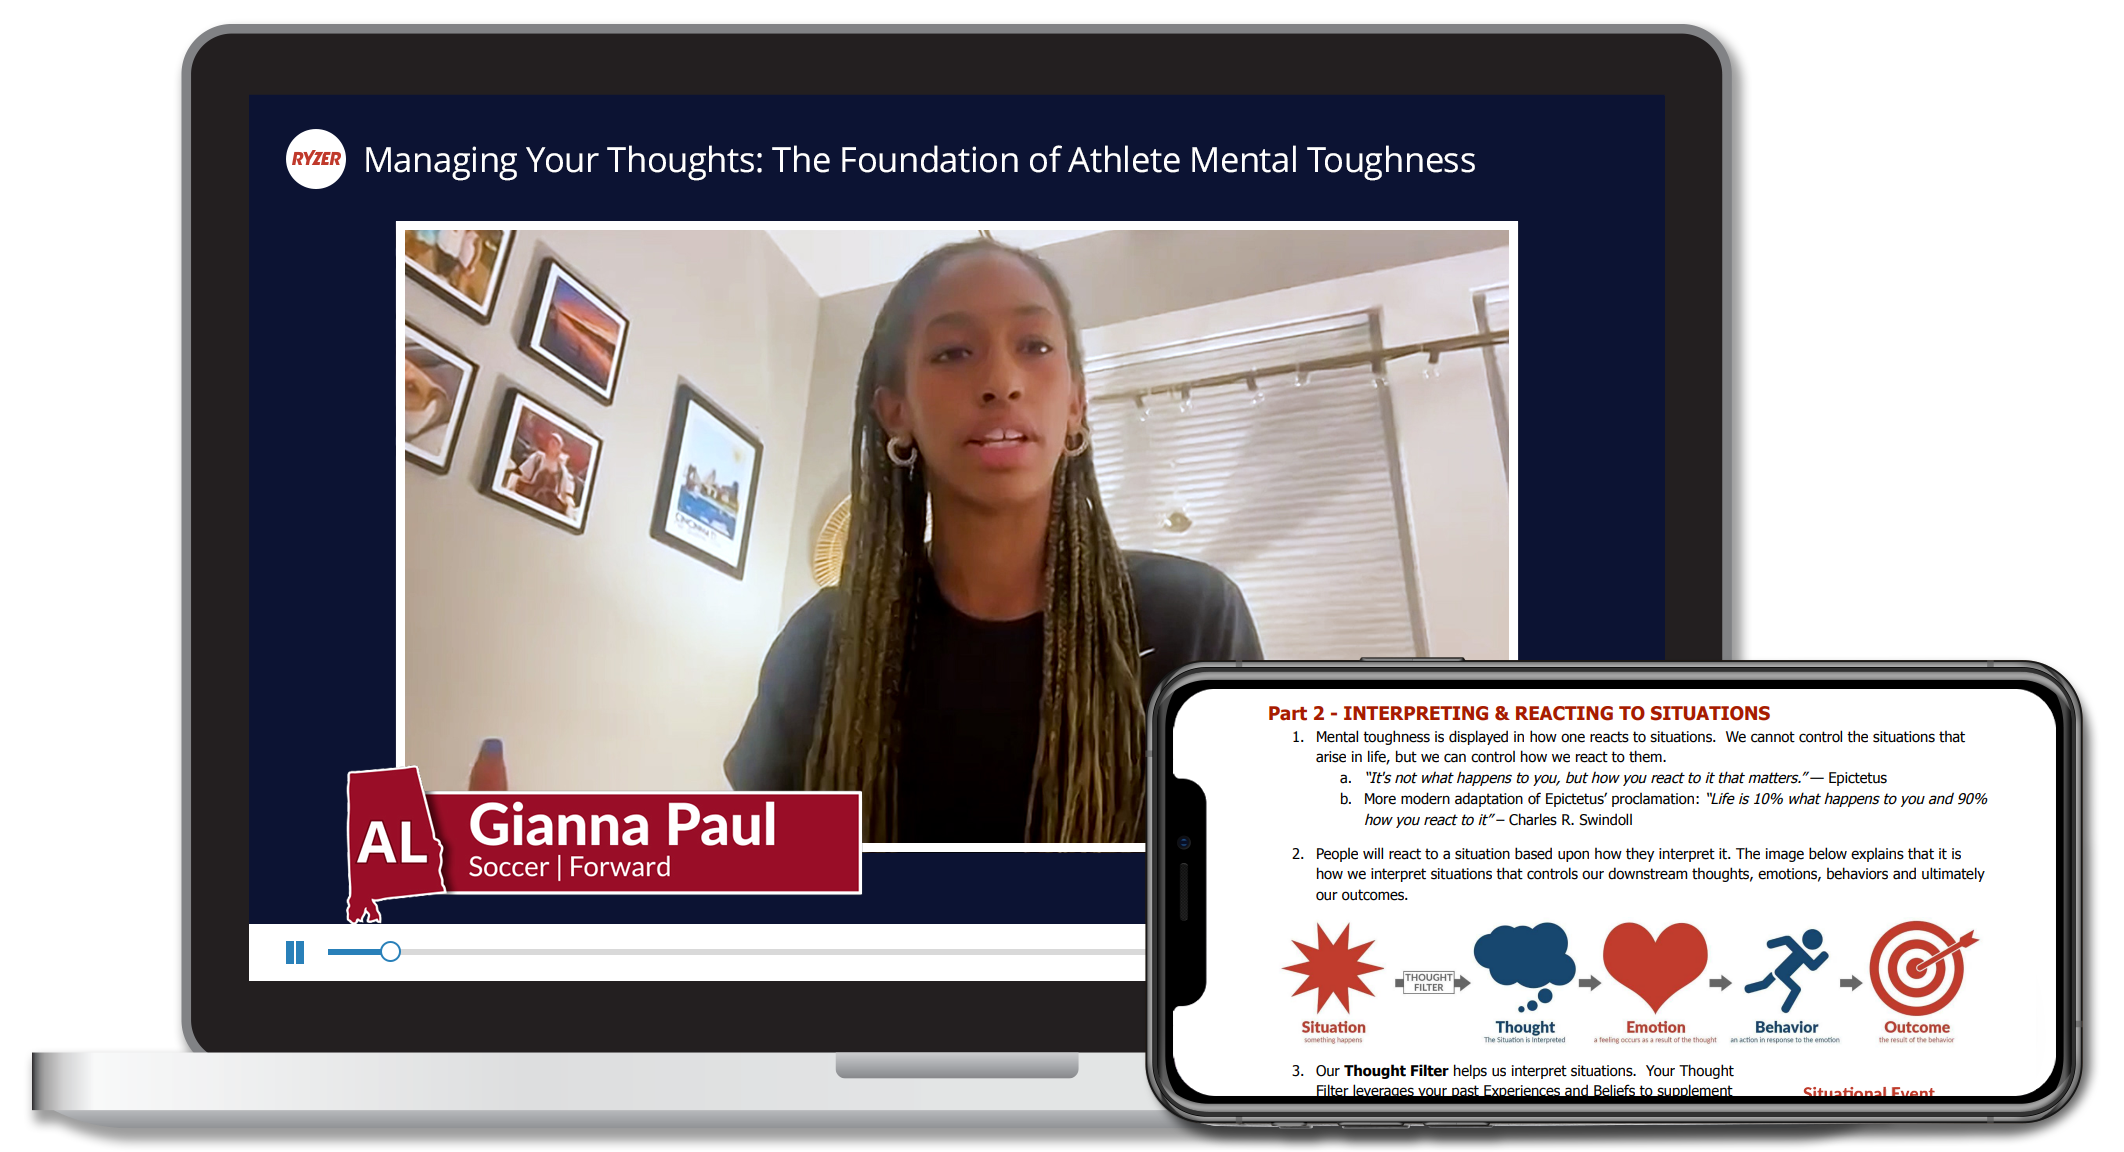 Laptop device showing a still from one of the Elite Mindset Training video courses. The still features NIL soccer athlete Gianna Paul. In the bottom right sits a graphic of a mobile device showing a different still from one of the Elite Mindset Training courses.